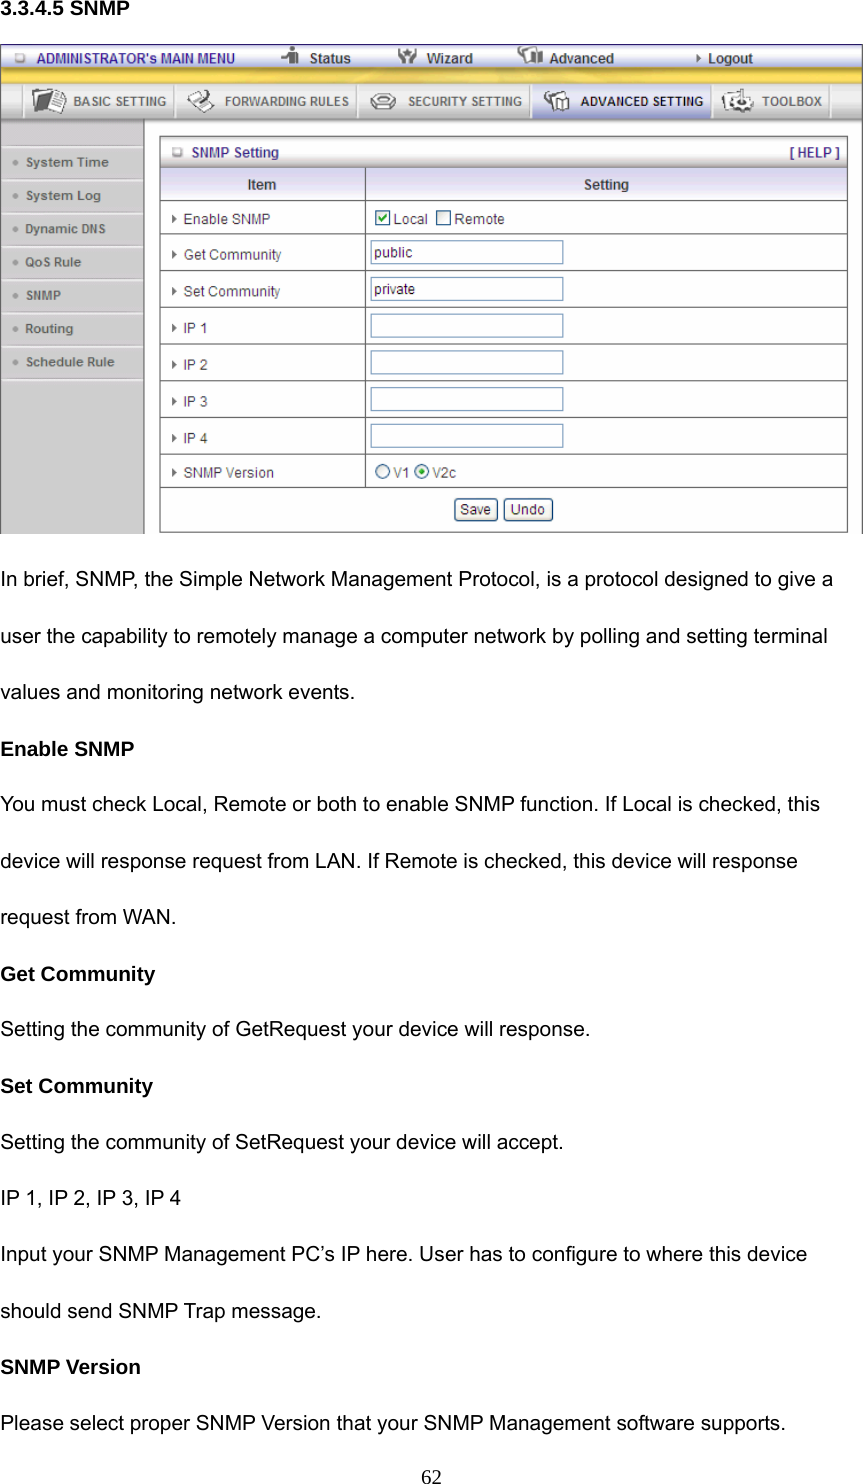  623.3.4.5 SNMP  In brief, SNMP, the Simple Network Management Protocol, is a protocol designed to give a user the capability to remotely manage a computer network by polling and setting terminal values and monitoring network events.   Enable SNMP You must check Local, Remote or both to enable SNMP function. If Local is checked, this device will response request from LAN. If Remote is checked, this device will response request from WAN.   Get Community Setting the community of GetRequest your device will response.   Set Community Setting the community of SetRequest your device will accept.   IP 1, IP 2, IP 3, IP 4 Input your SNMP Management PC’s IP here. User has to configure to where this device should send SNMP Trap message. SNMP Version Please select proper SNMP Version that your SNMP Management software supports. 